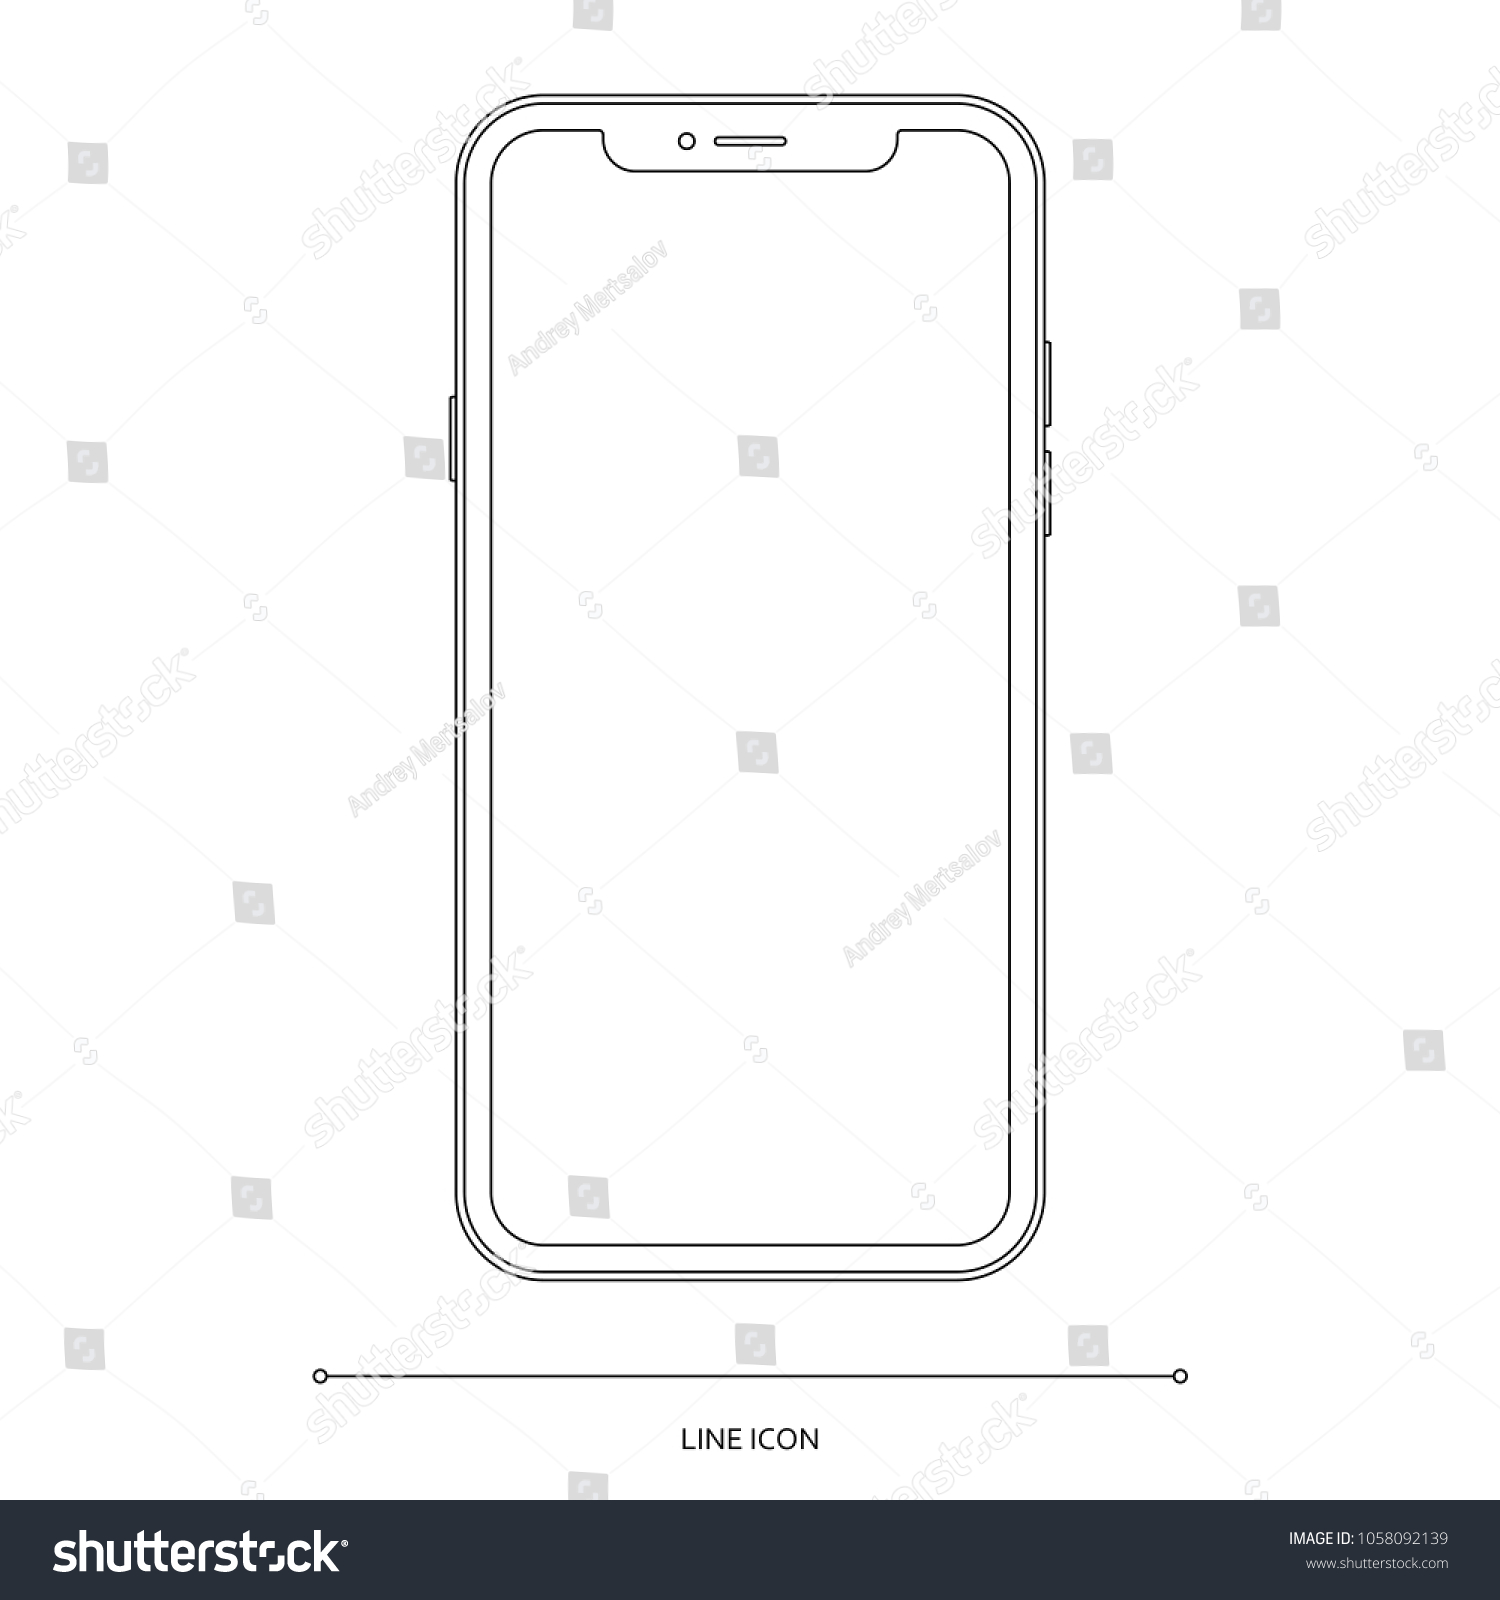 smartphone frameless icon in outline design isolated on white background. mobile phone mockup in thin line style. stock vector illustration #1058092139